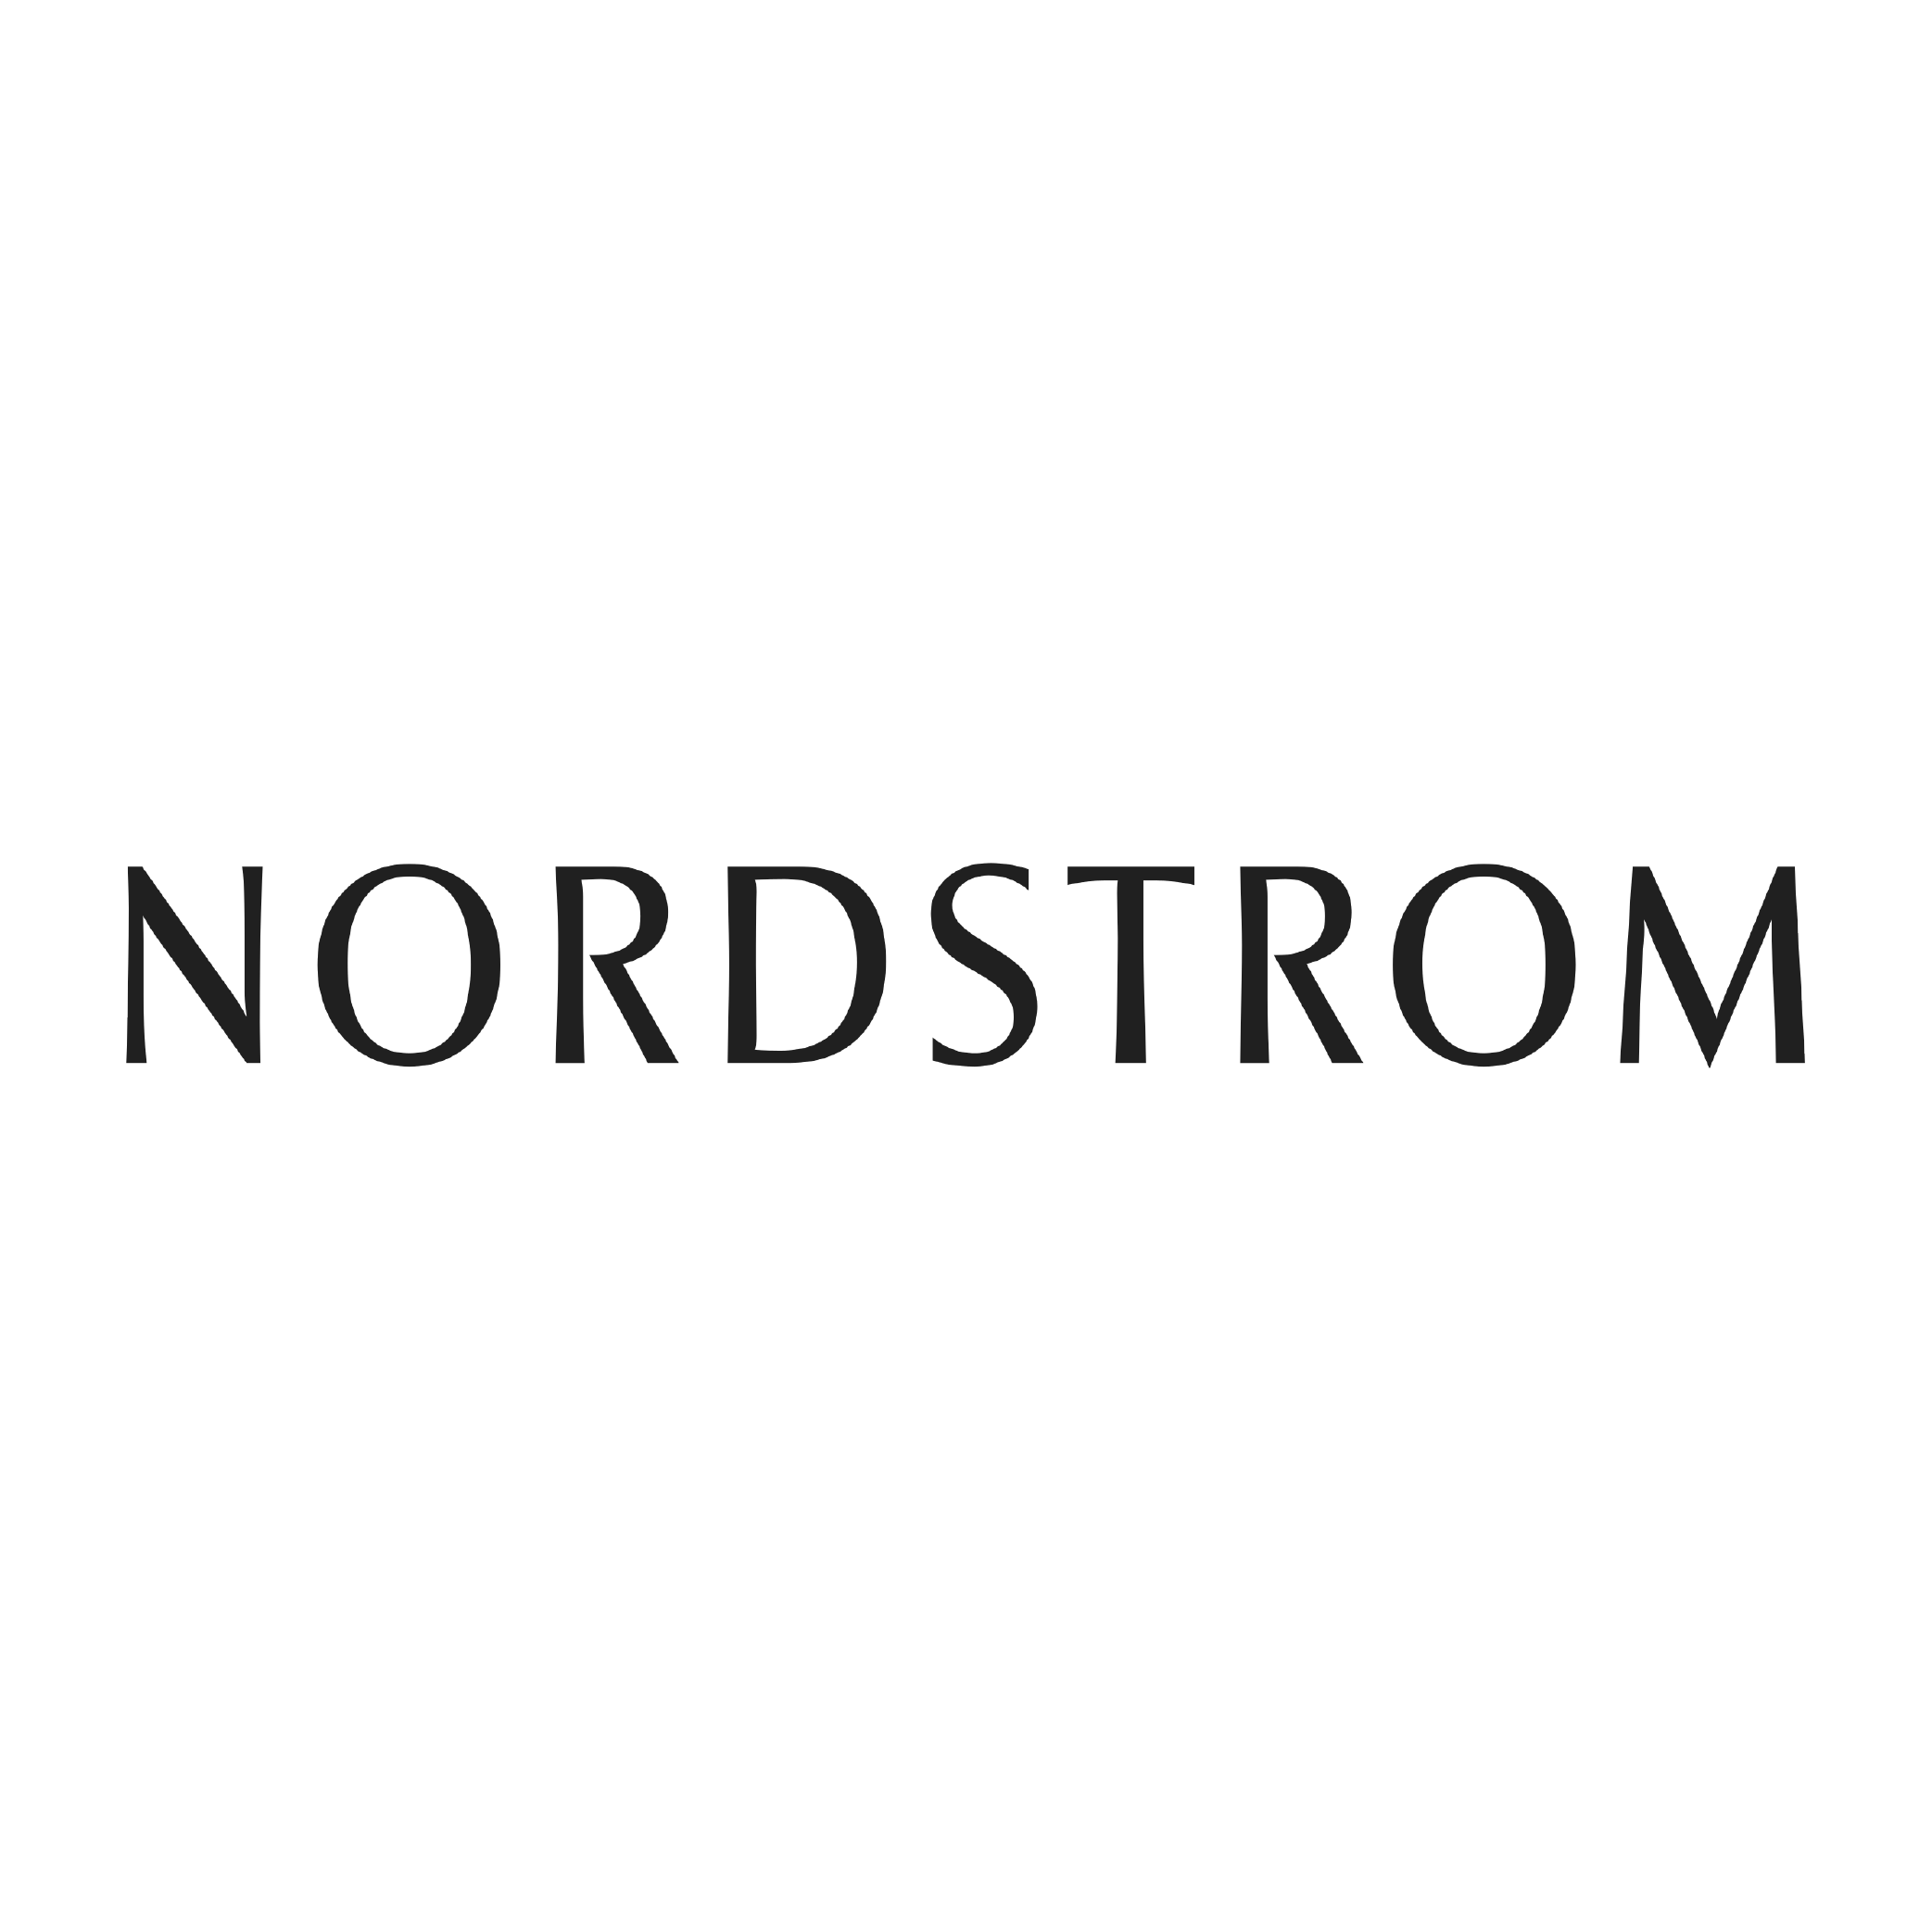 Nordstrom, Inc. - The Andover Company, Inc.